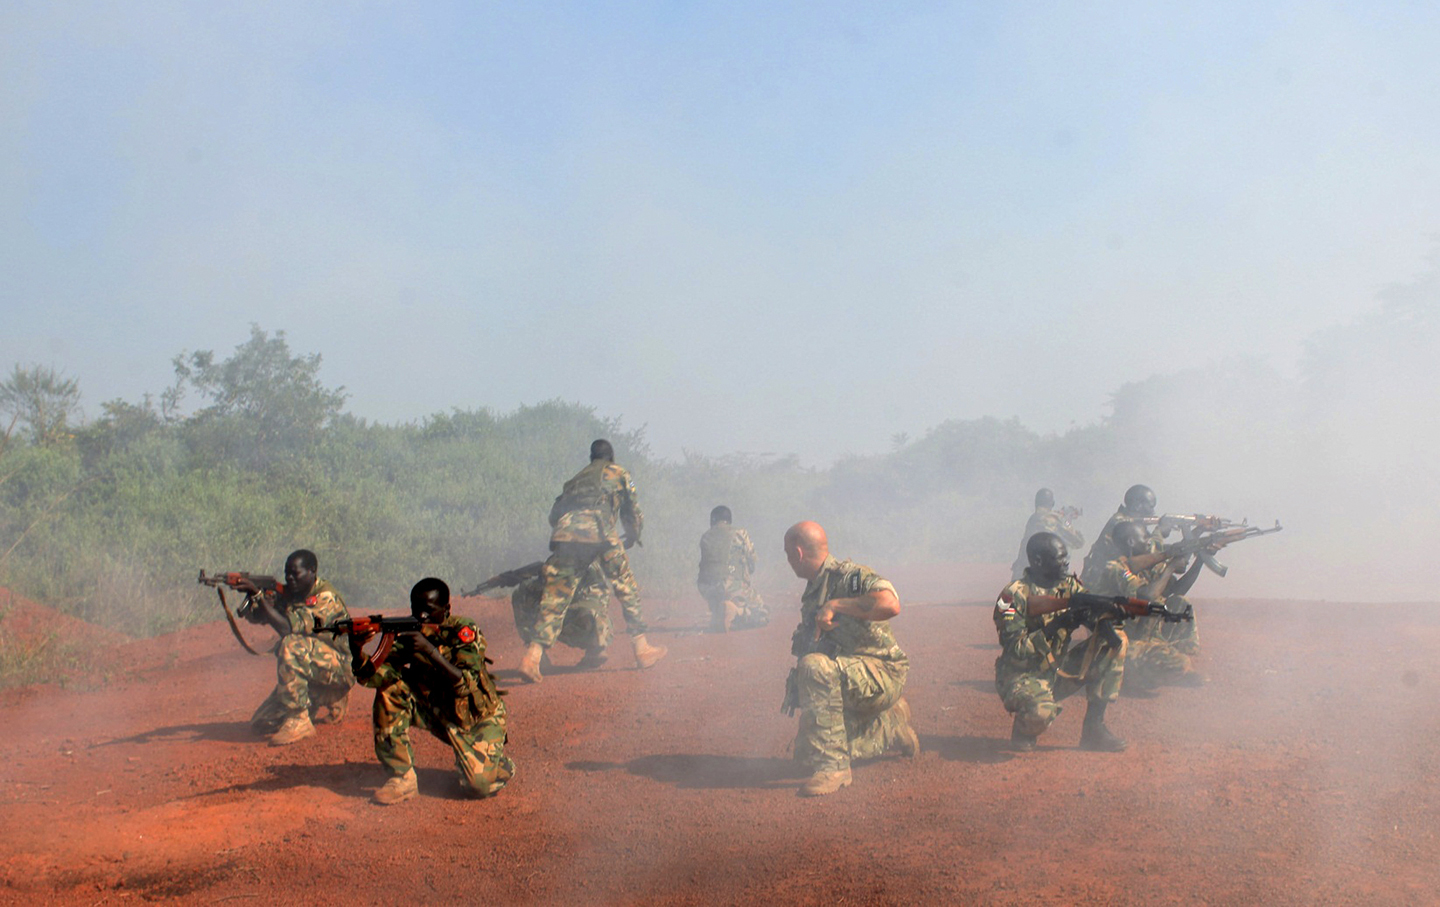 A U.S. Special Forces trainer supervises a military assault drill for a unit within the Sudan People's Liberation Army conducted in Nzara on the outskirts of Yambio